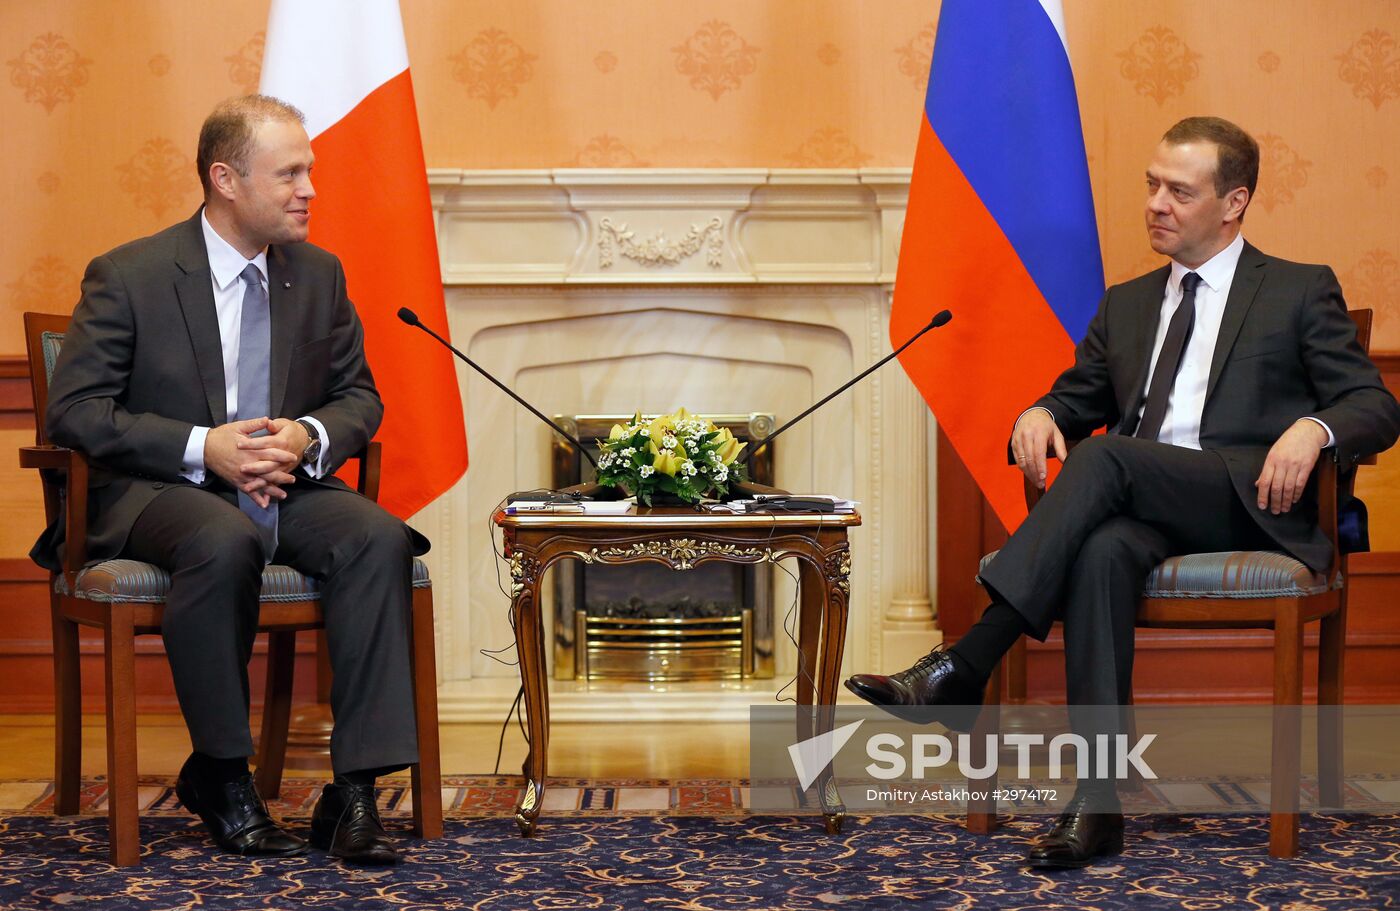 Prime Minister Medvedev meets with Malta's Prime Minister Muscat